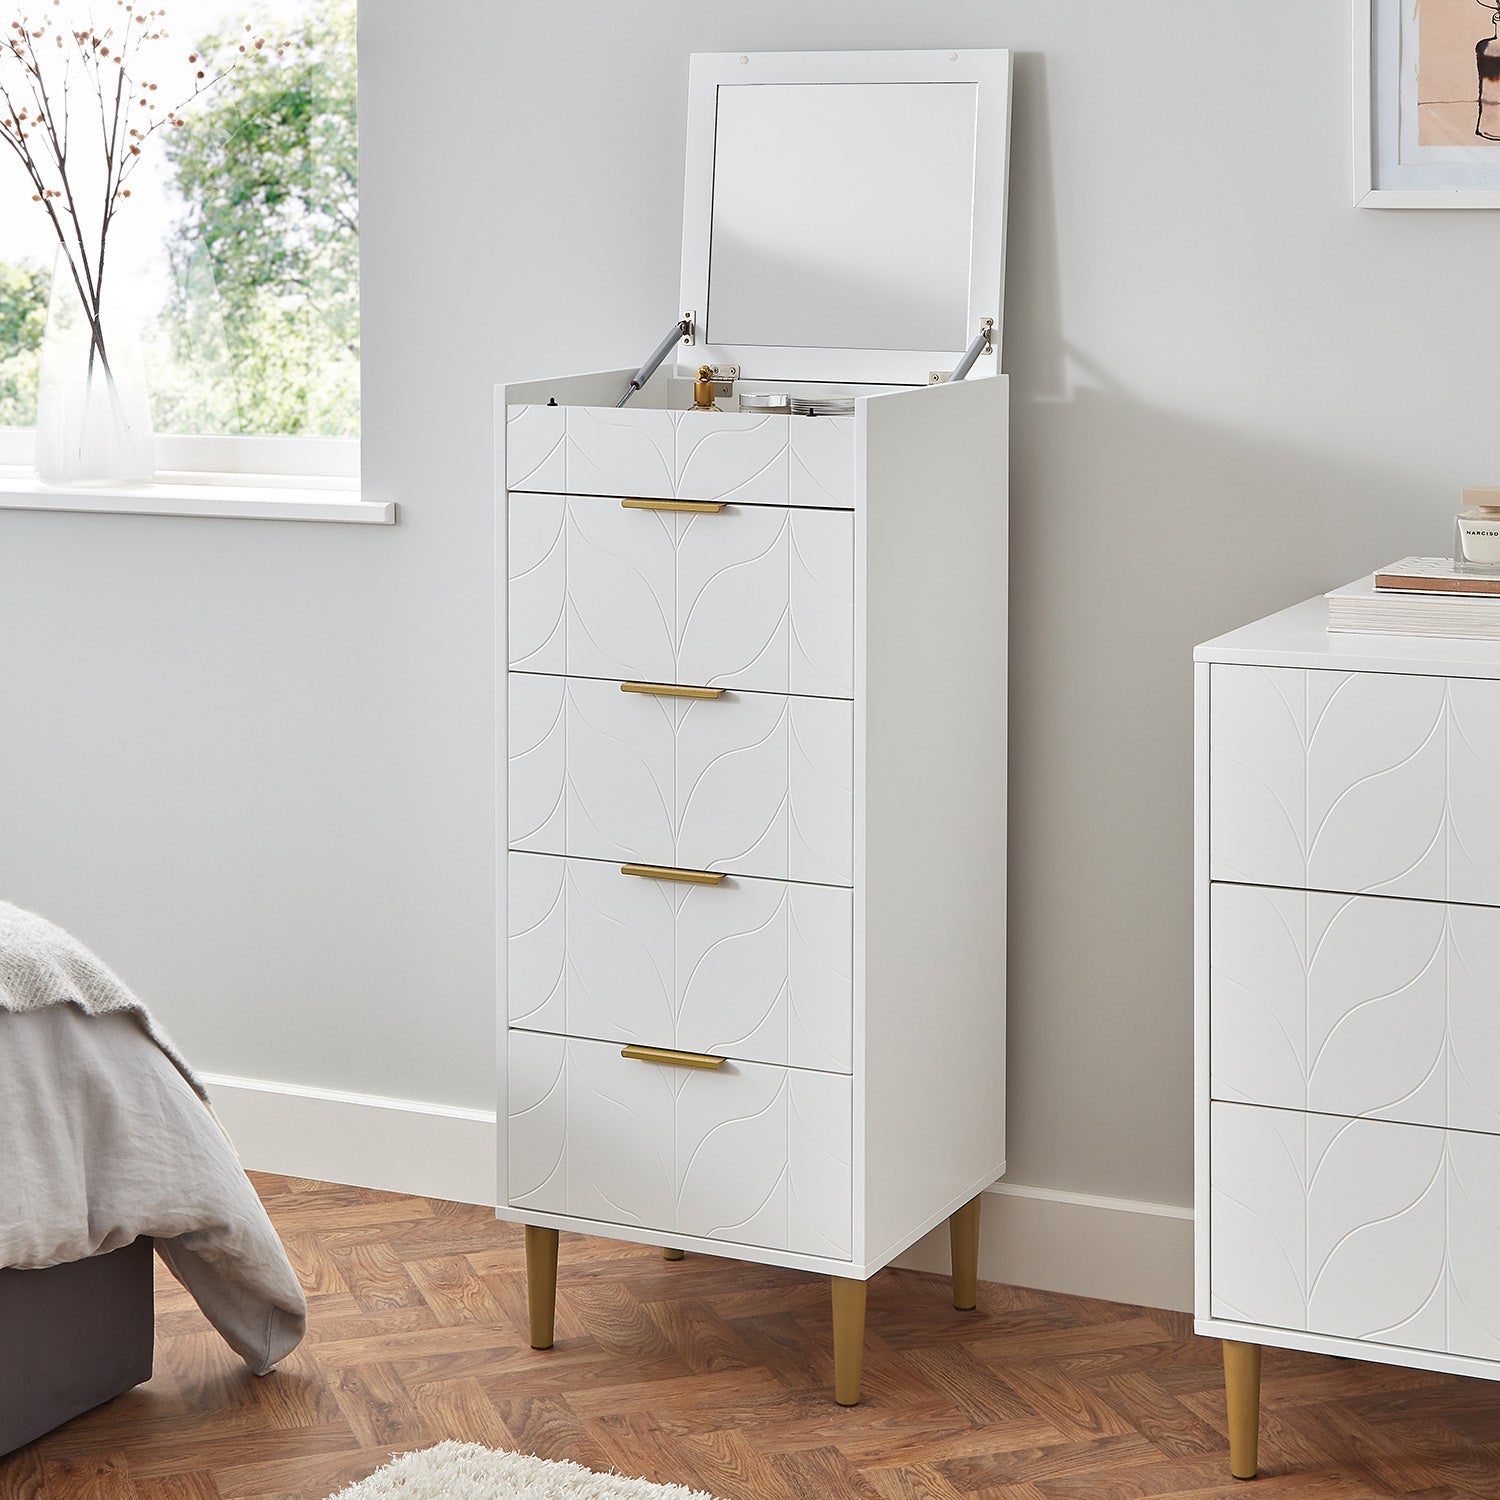 Gloria wardrobe and drawers set - 4 over 4 chest of drawers - white - Laura James